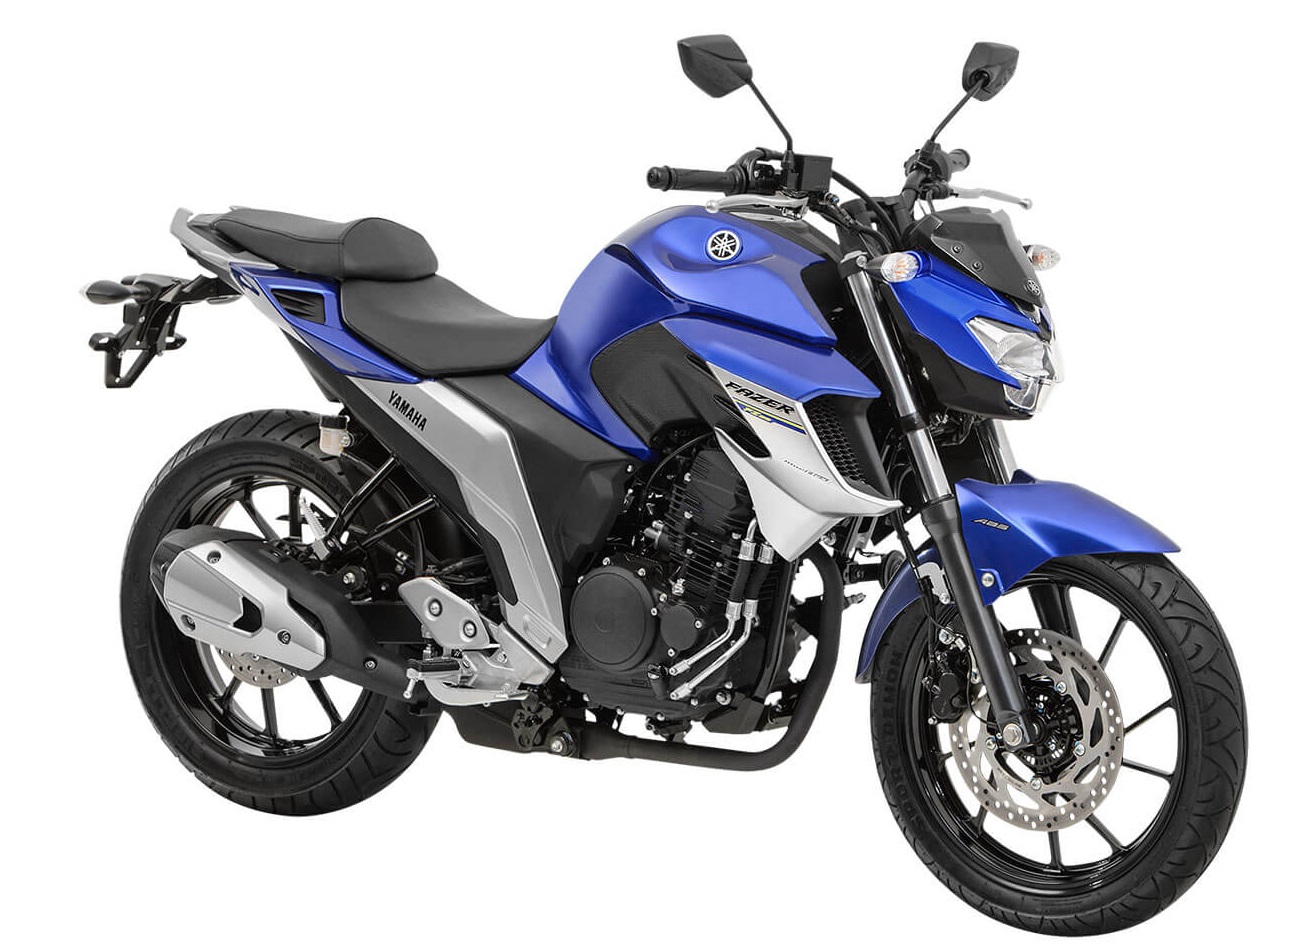 New Yamaha Fz25 Abs Launch Early Next Year May Get A Power Bump